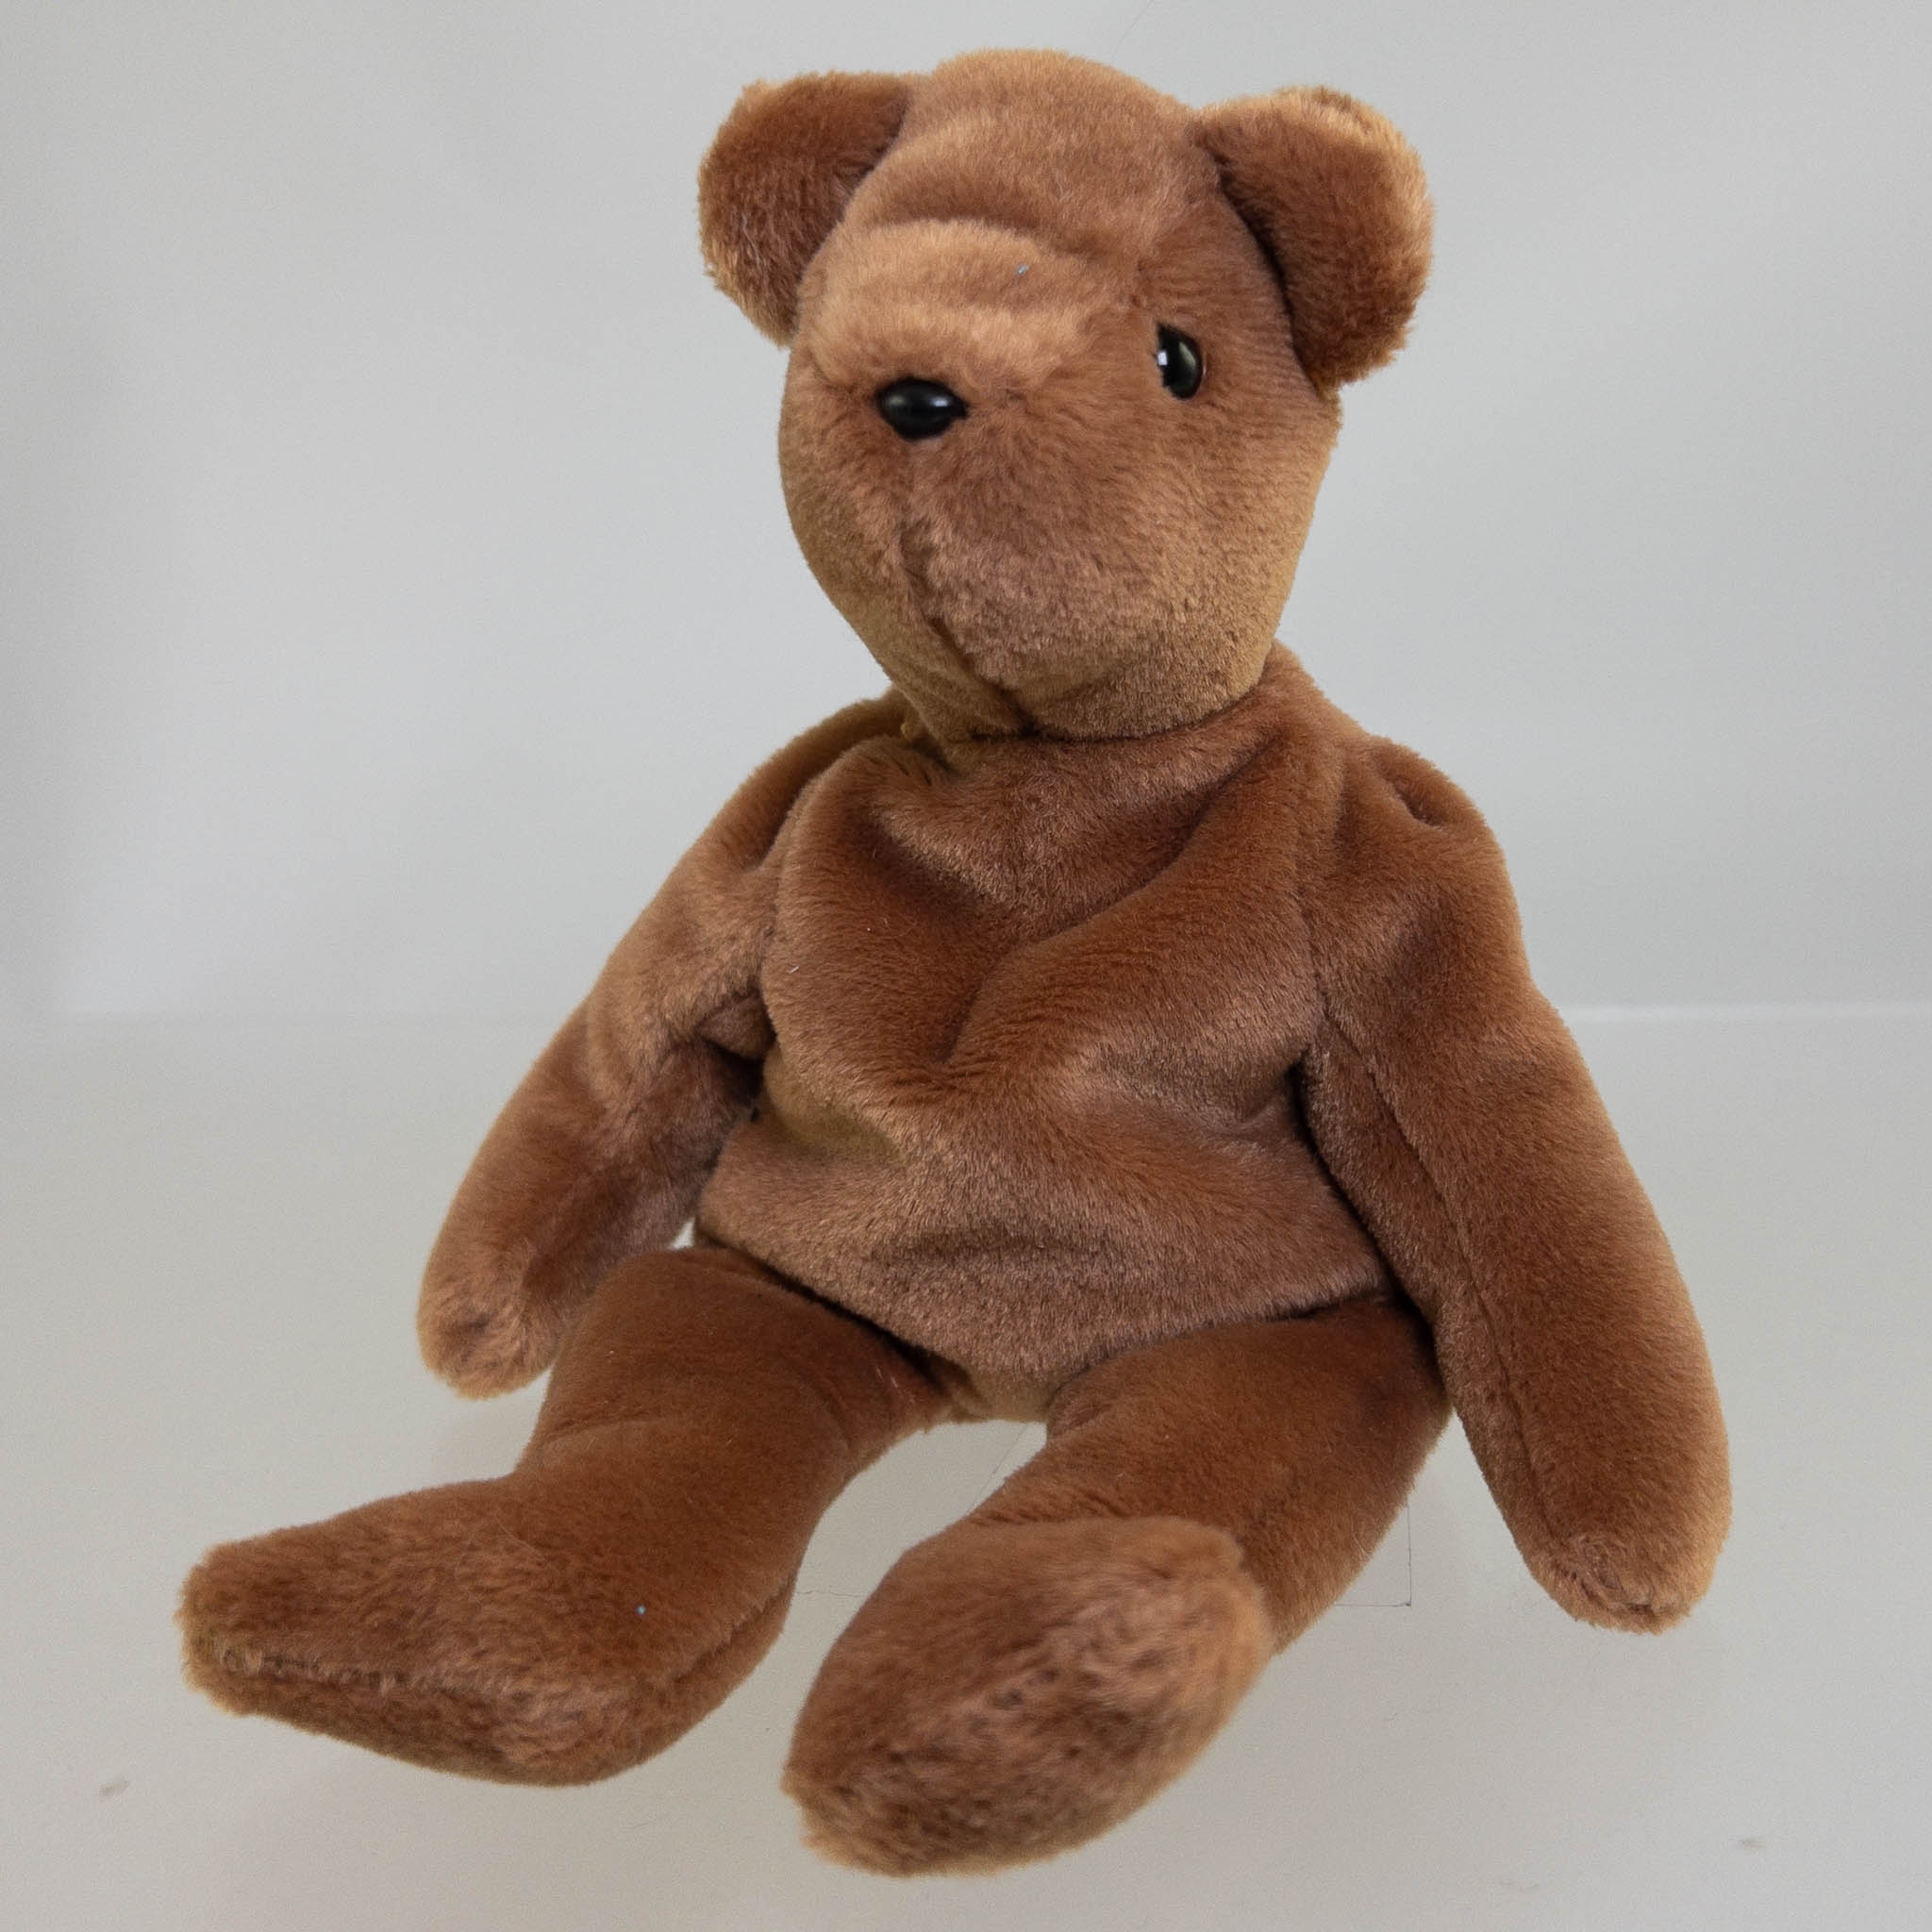 TY Beanie Baby - TEDDY BROWN - OLD FACE (No Hang Tag - 1st Gen Tush Tag)